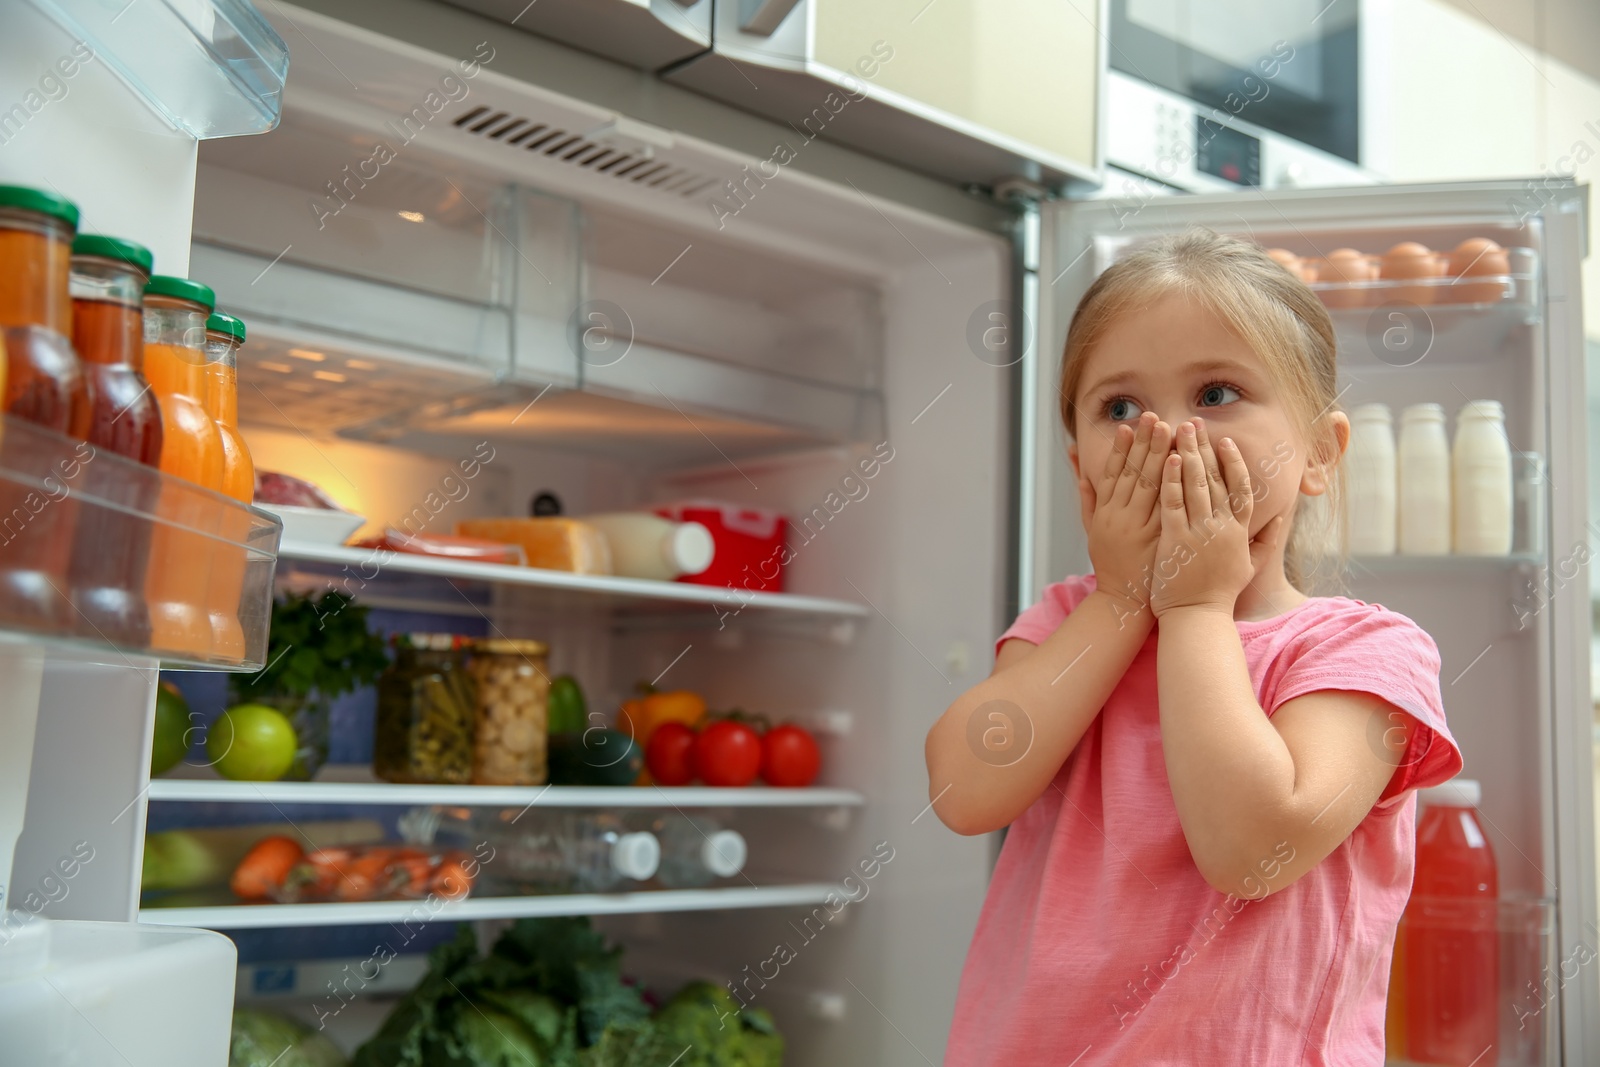 Photo of Little girl near bad smelling refrigerator at home